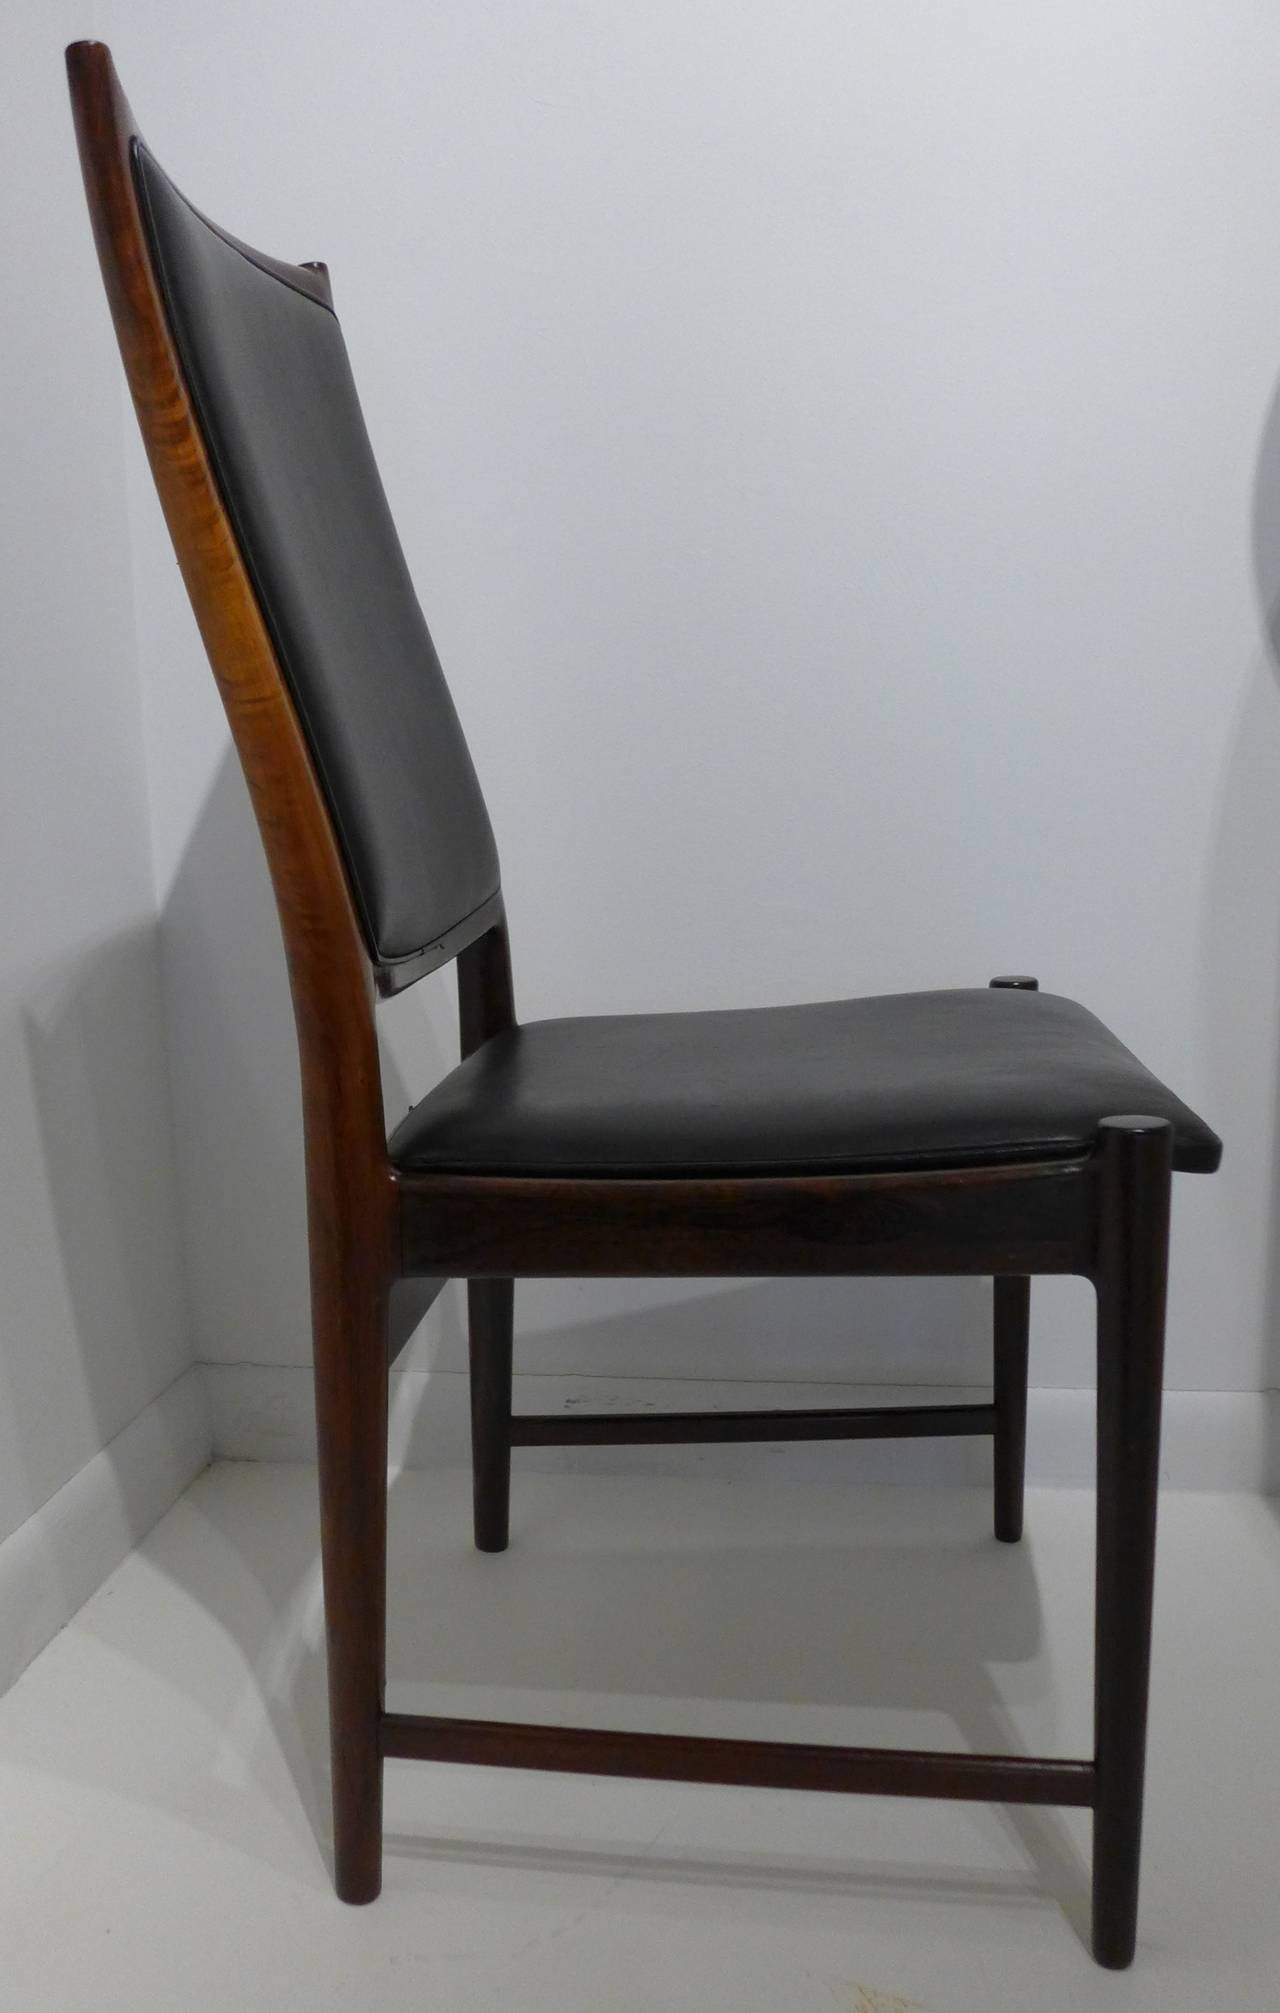 Well-crafted chair with high back and graceful and fluid lines, of solid and nicely figured Brazilian rosewood with leather seat and back, by leading Norwegian furniture designer Torbjørn Afdal. Made at the Bruksbo furniture workshop for